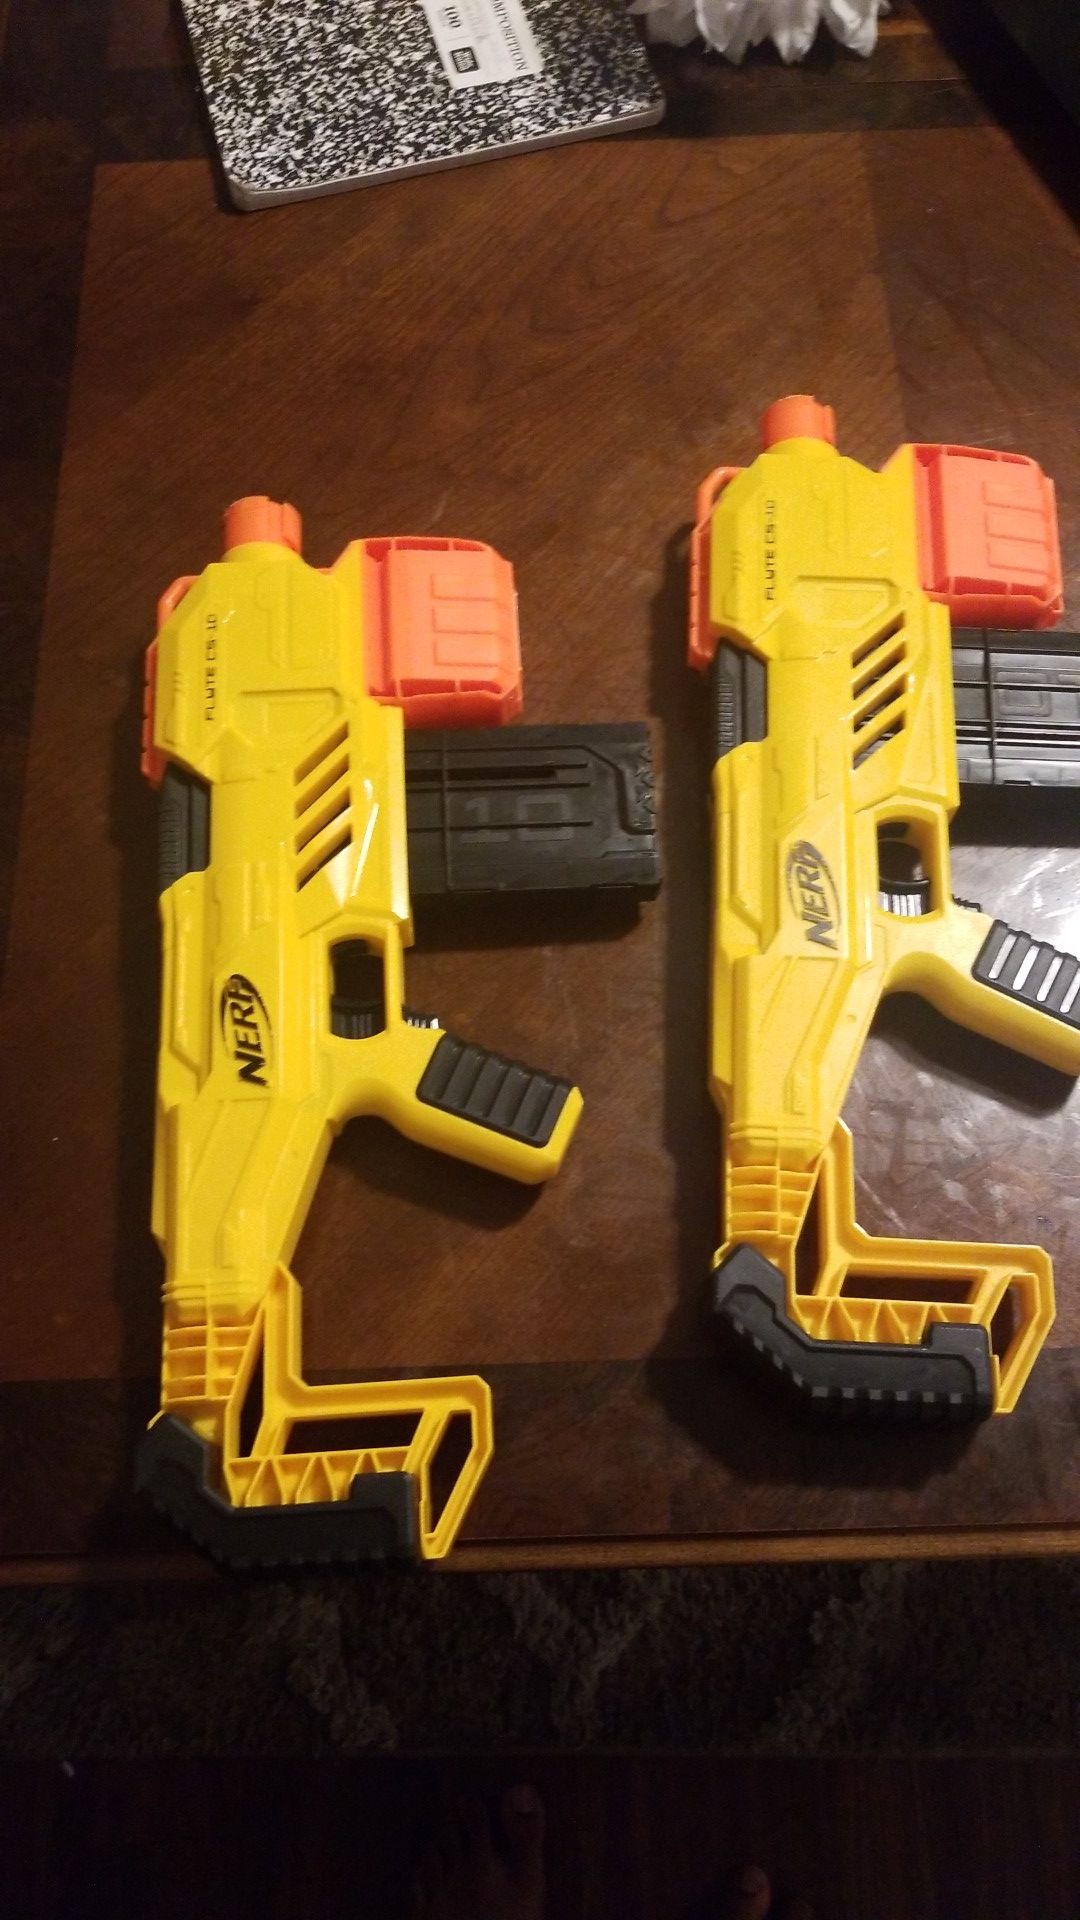 Two electric Nurf guns without darts